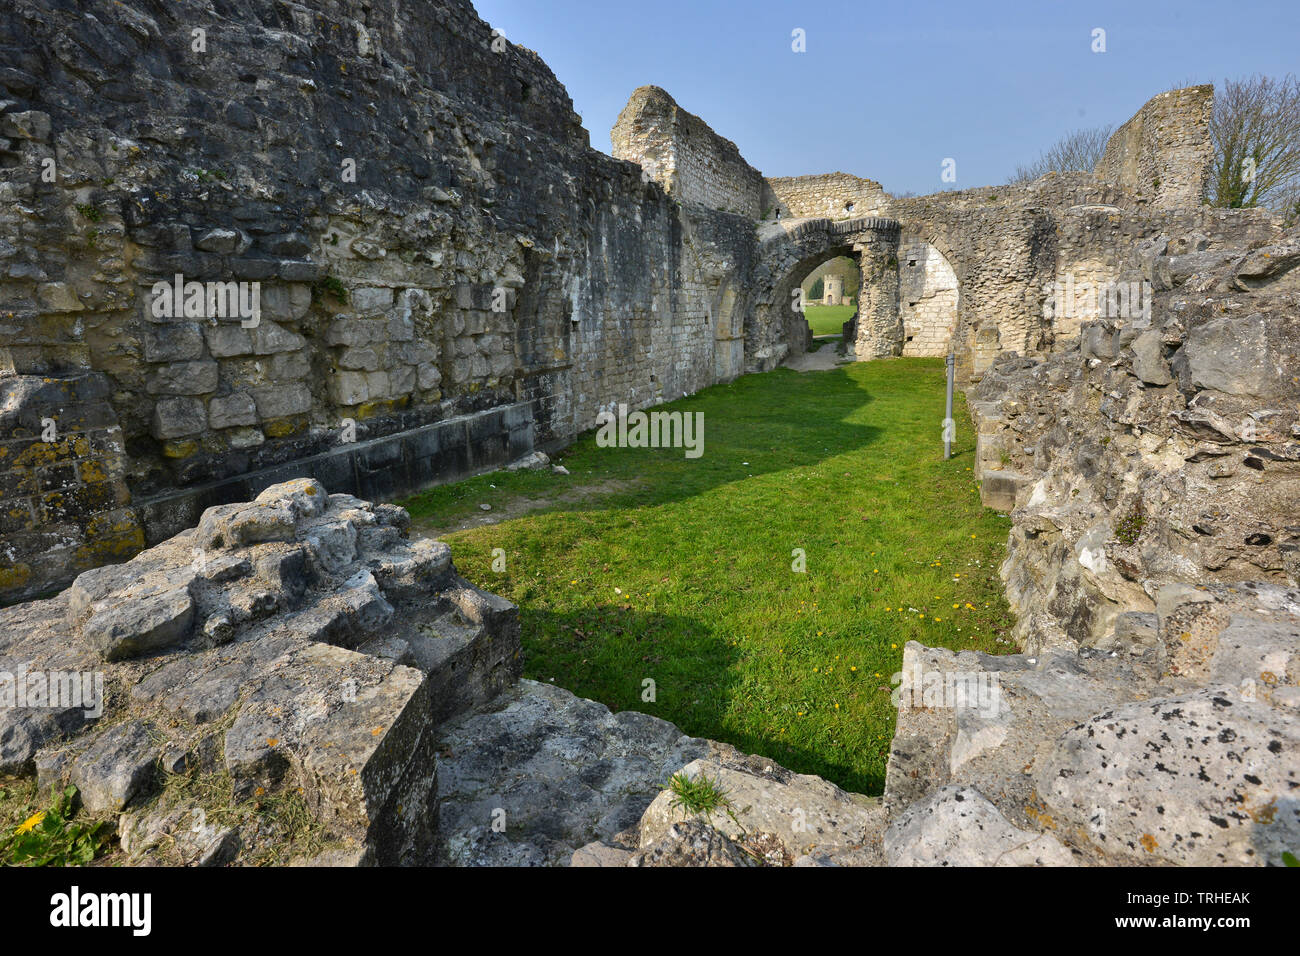 Lewes Cluniac Priory ruins, East Sussex, UK Stock Photo